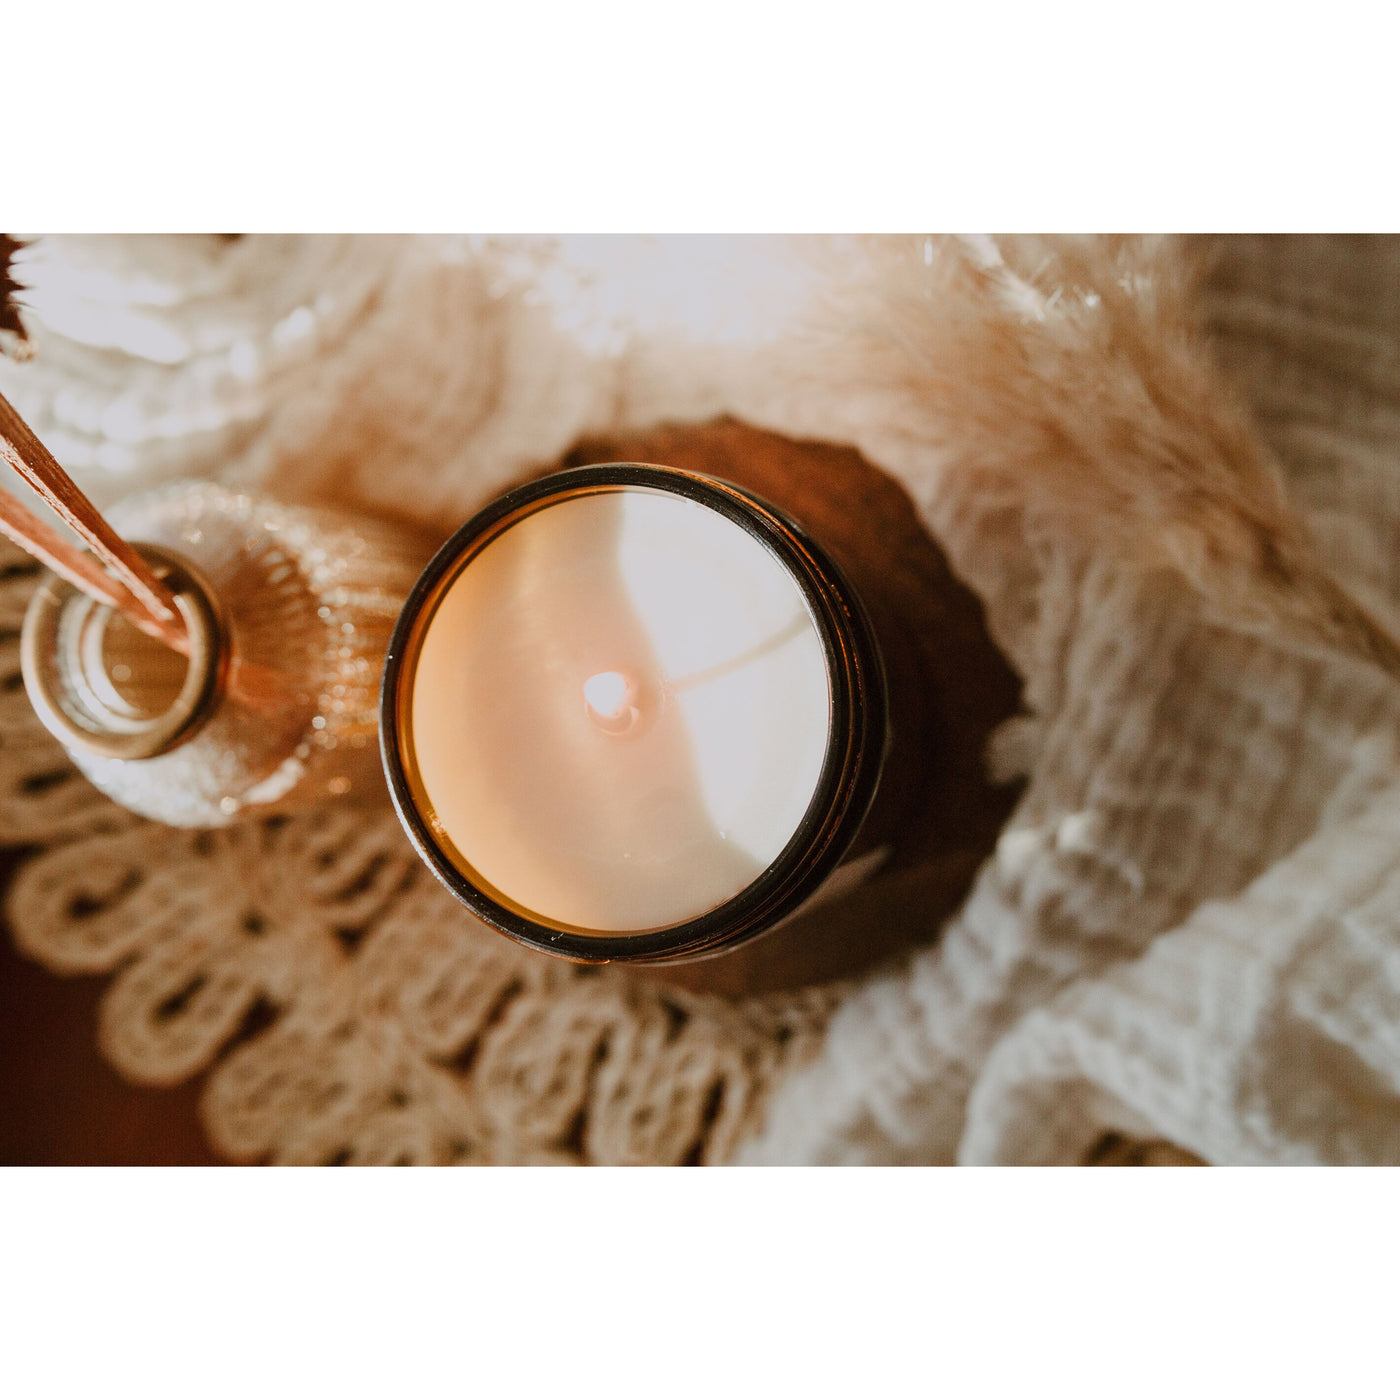 Fresh Coffee - Scented Soy Candle - Almira Creations